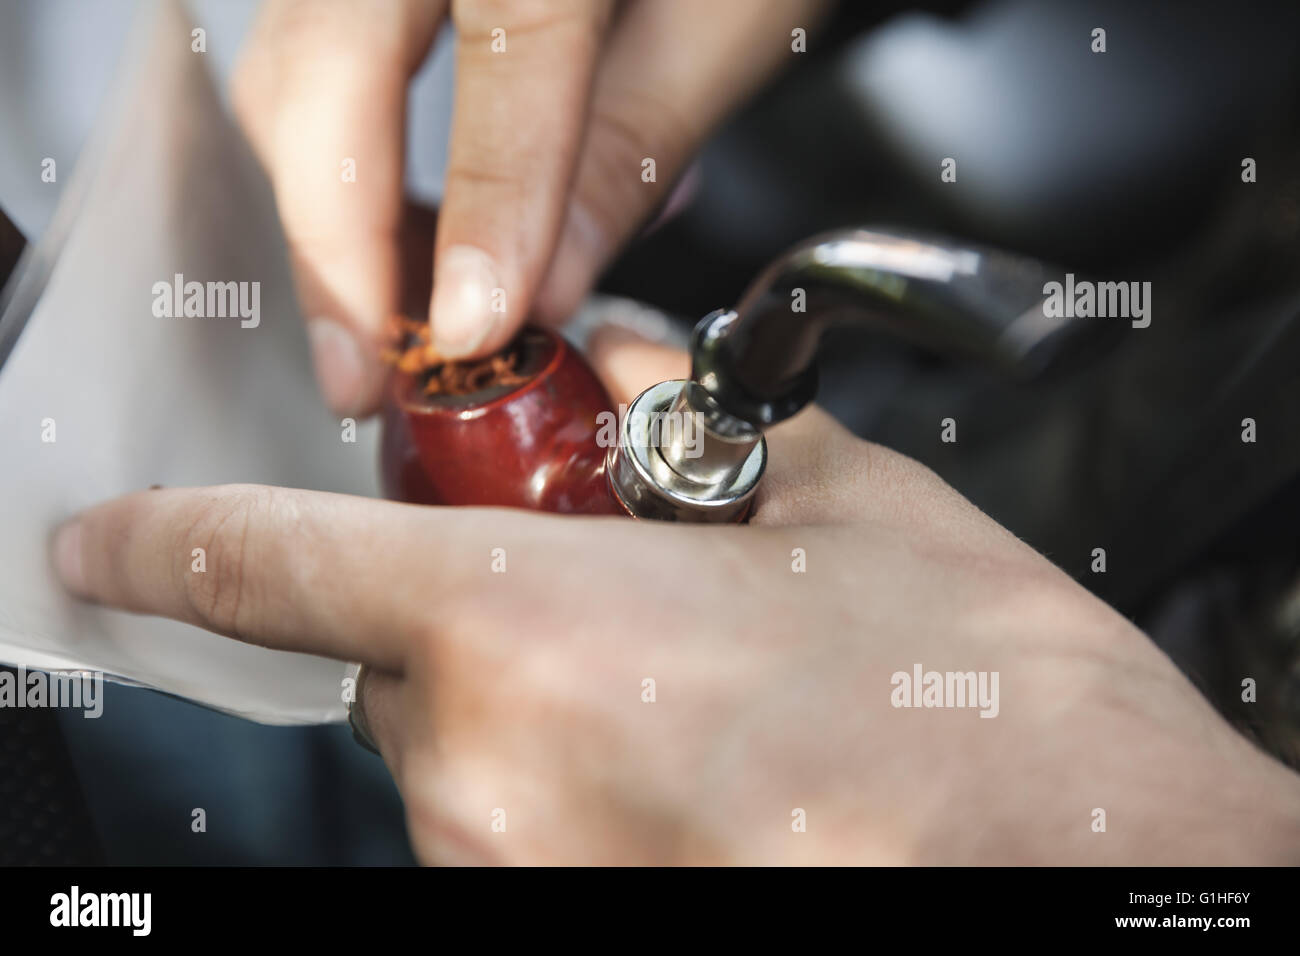 Man fills his pipe with tobacco, close up photo with selective focus on pipe Stock Photo